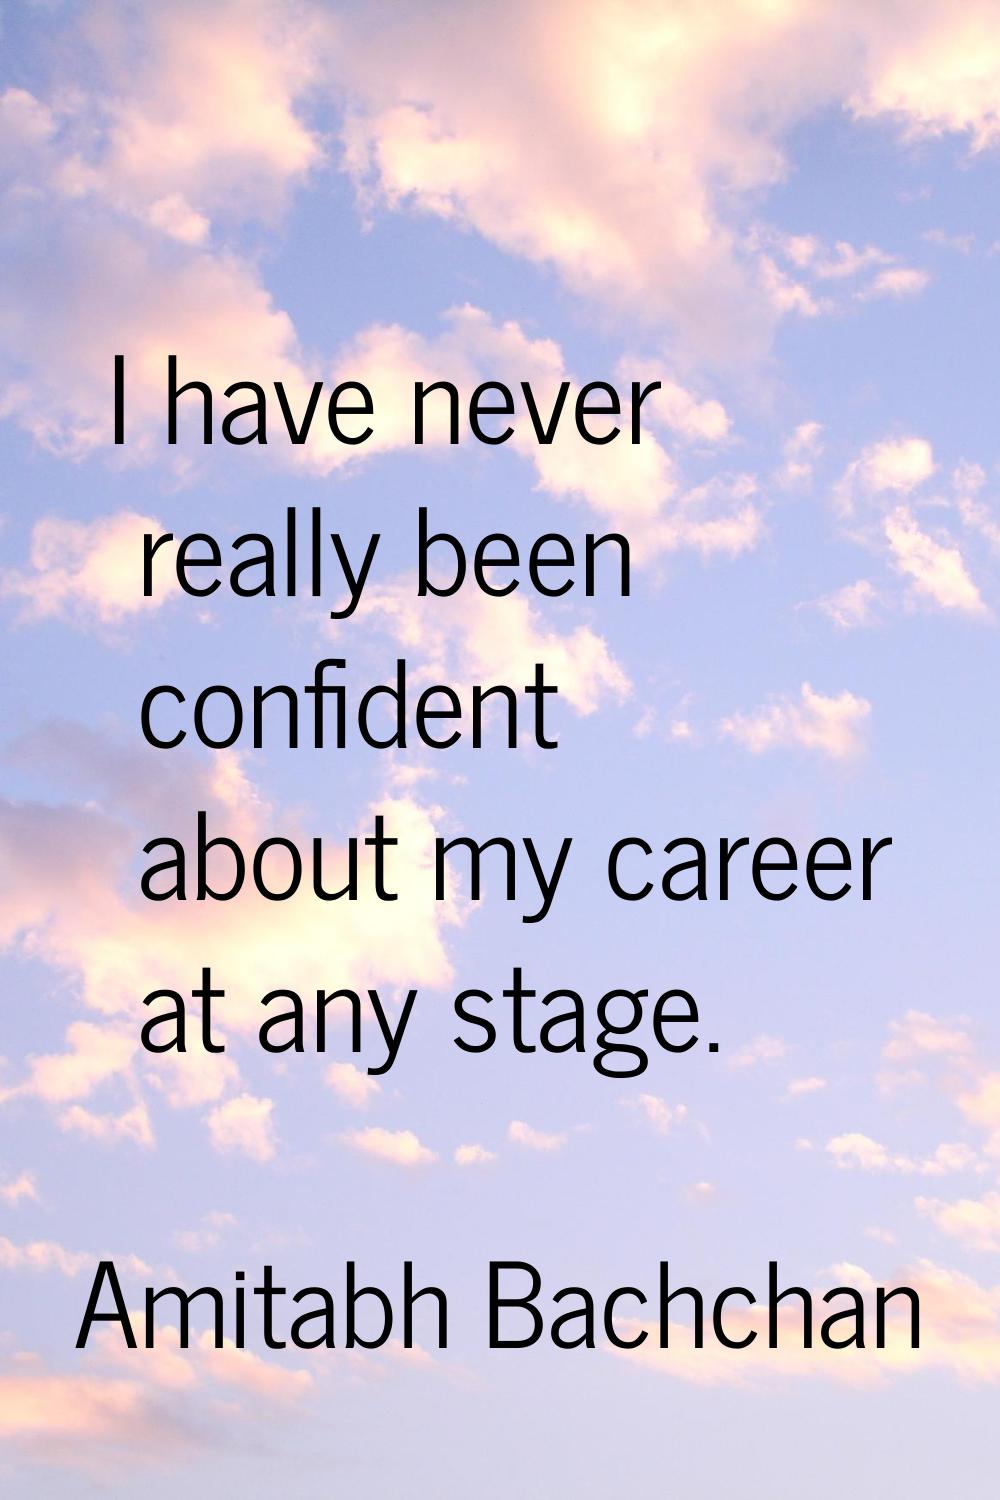 I have never really been confident about my career at any stage.